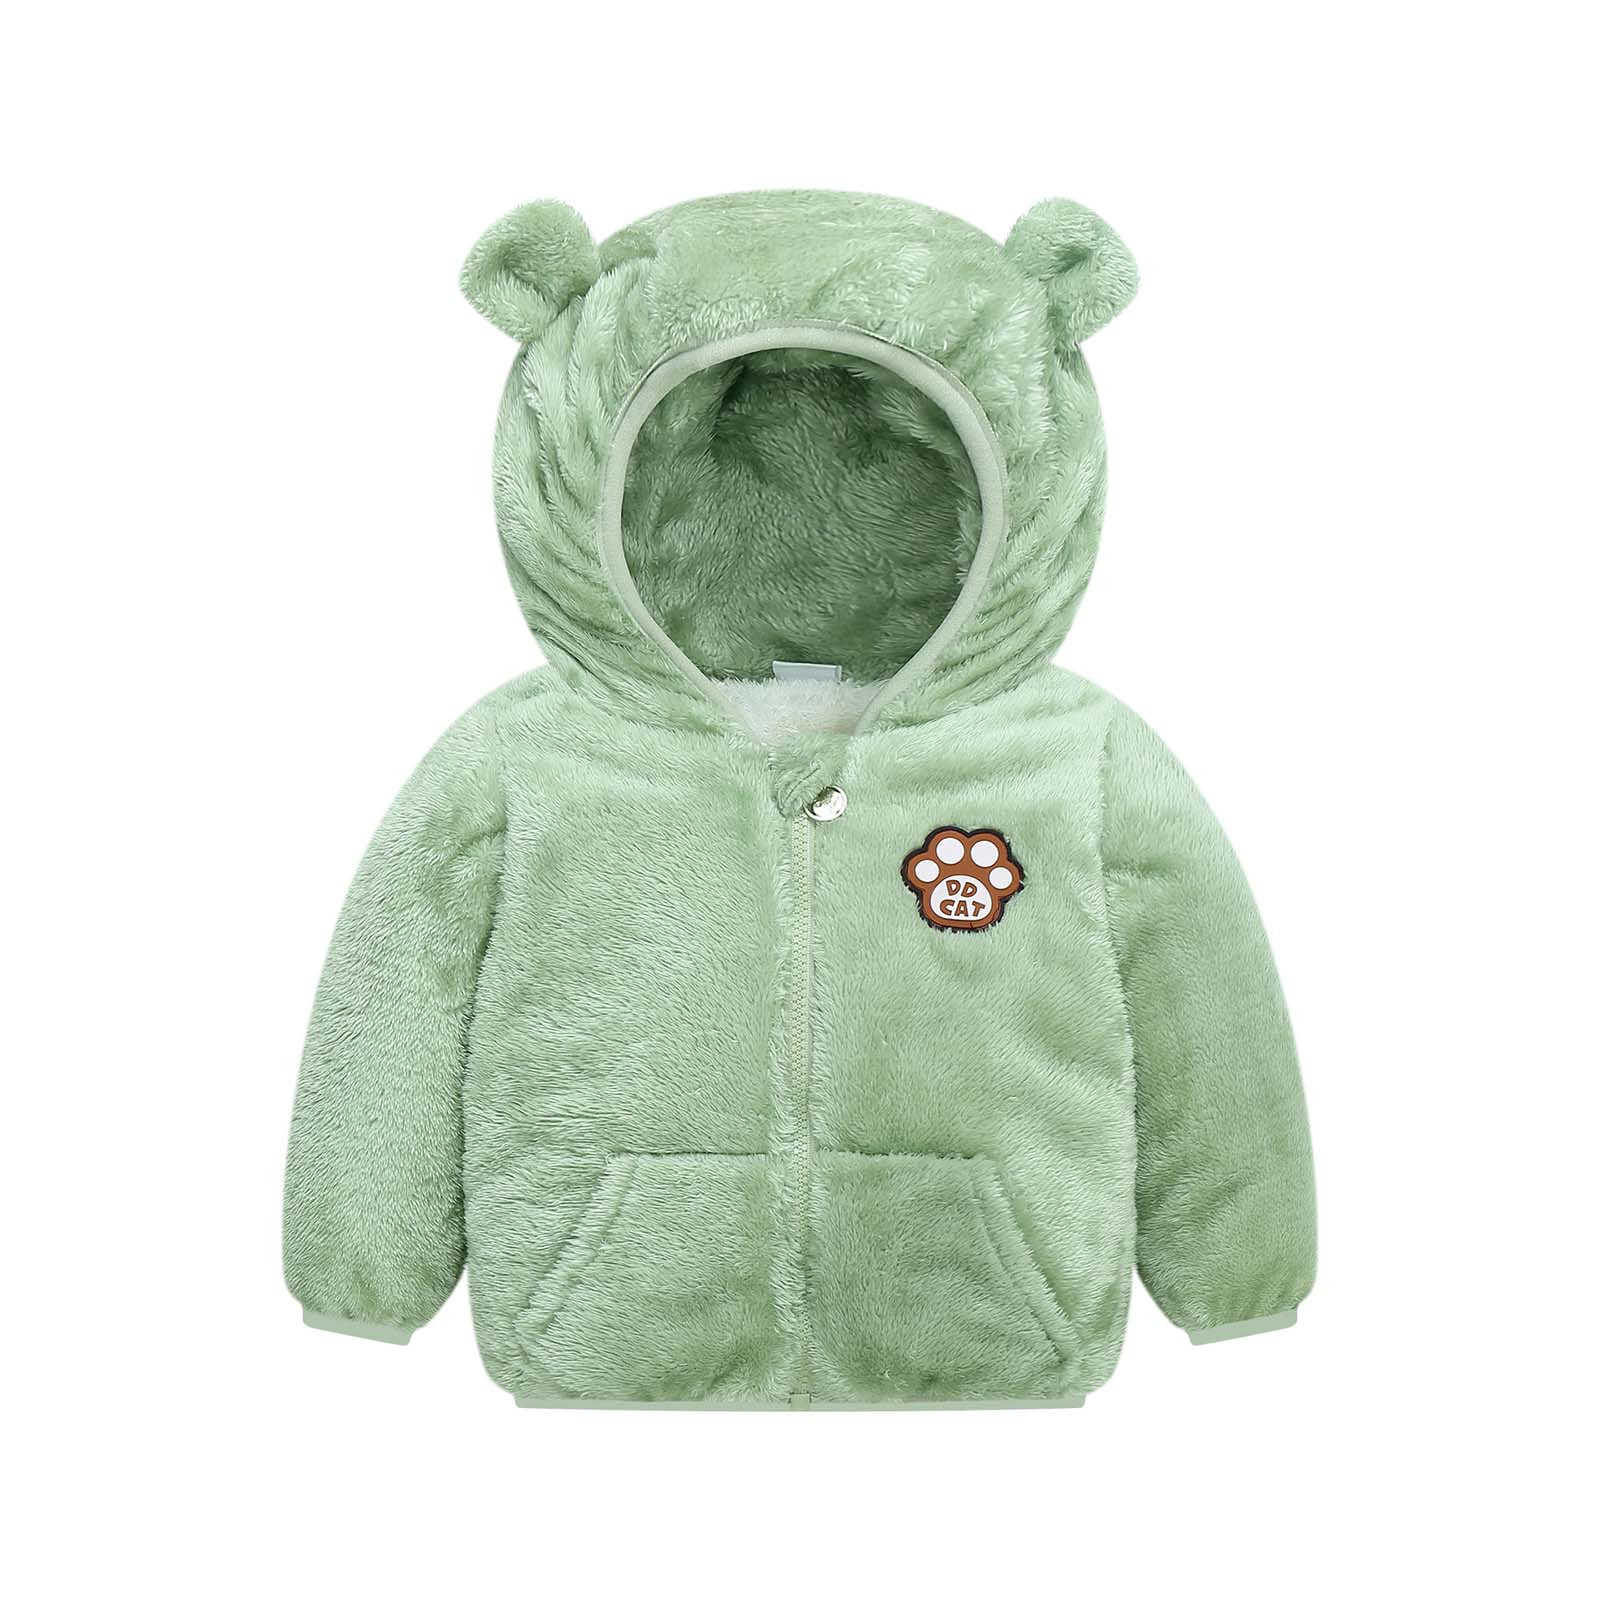 Tagold Boys and Girls Winter Cotton Coats Outerwear Jackets Baby Kids Fleece Hoodie Tops Fall Winter Hooded Jacket Solid Coat Gifts for Kids on Clearance Green 6-12 Months - image 1 of 5